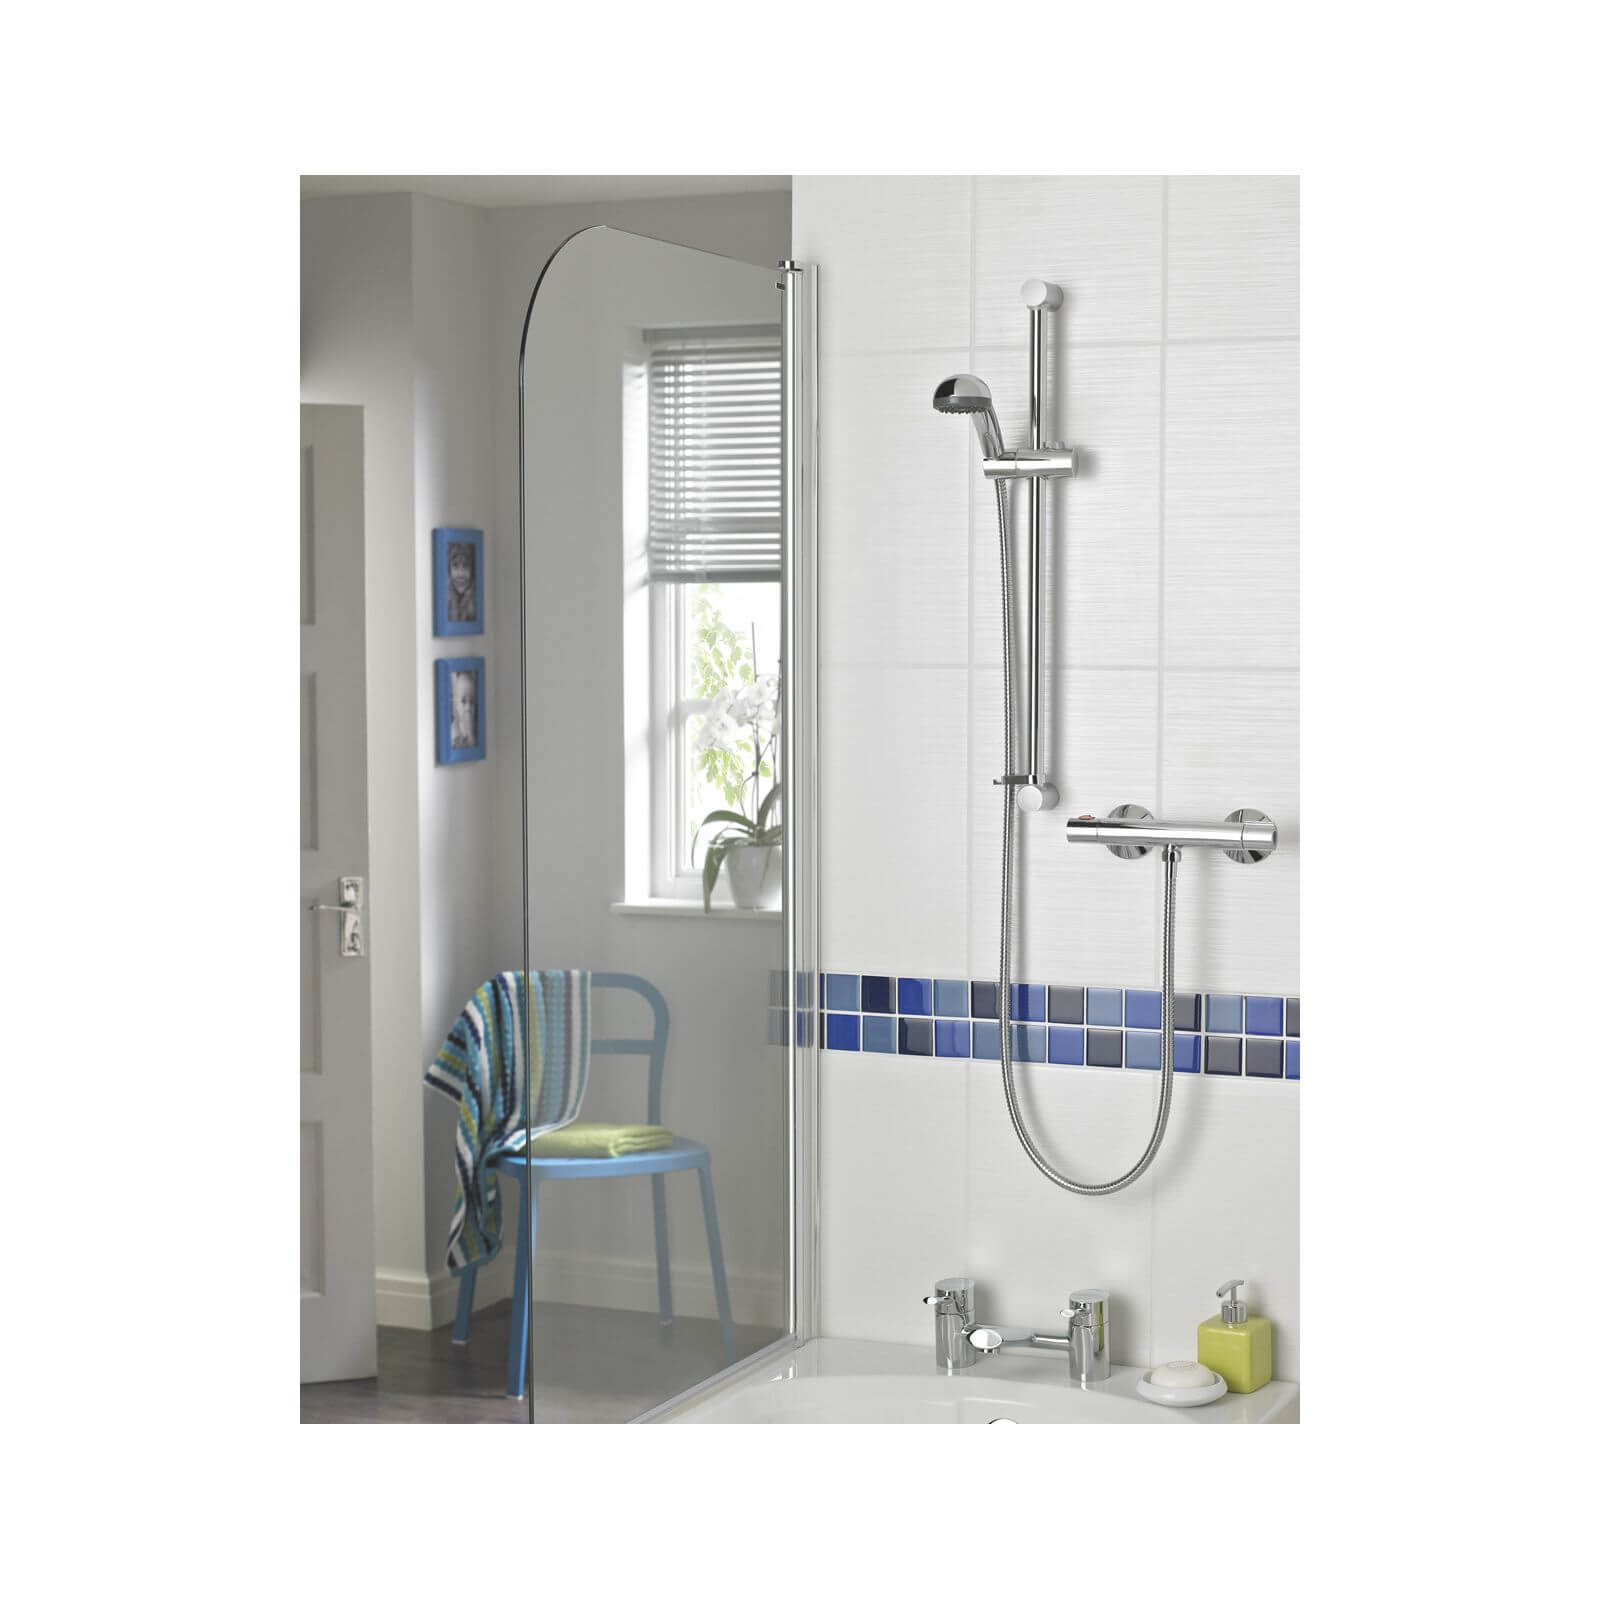 Bristan Zing Cool Touch Thermostatic Mixer Shower with Kit